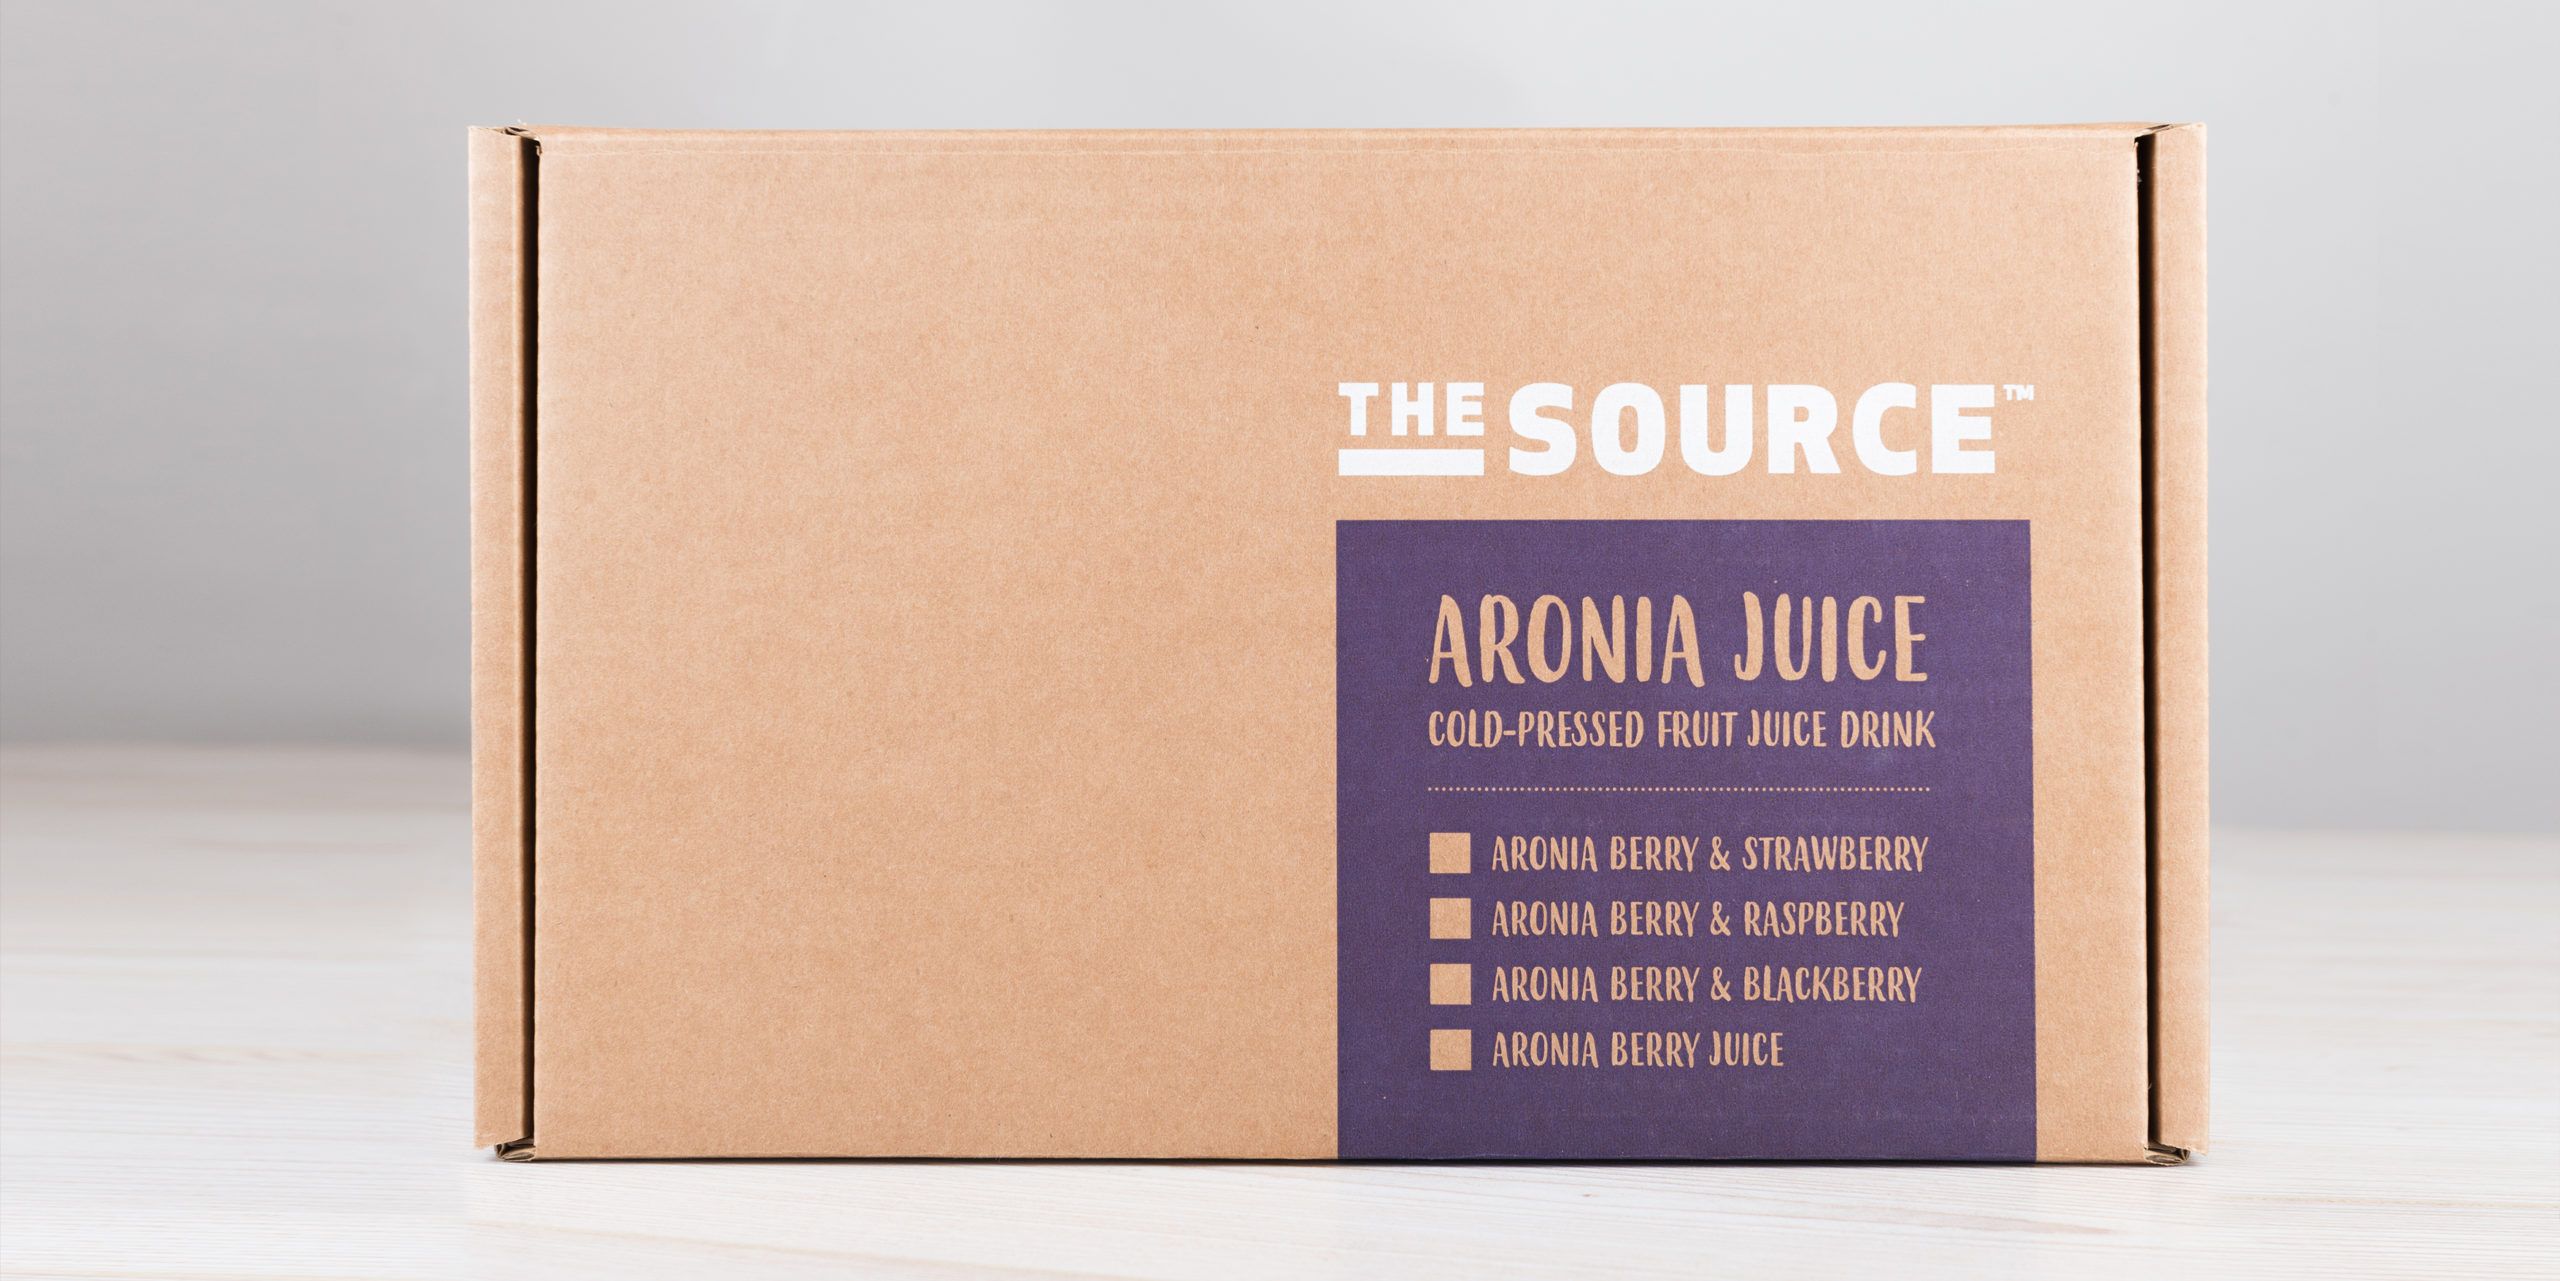 Aronia Berry Drink branding by Toast Food